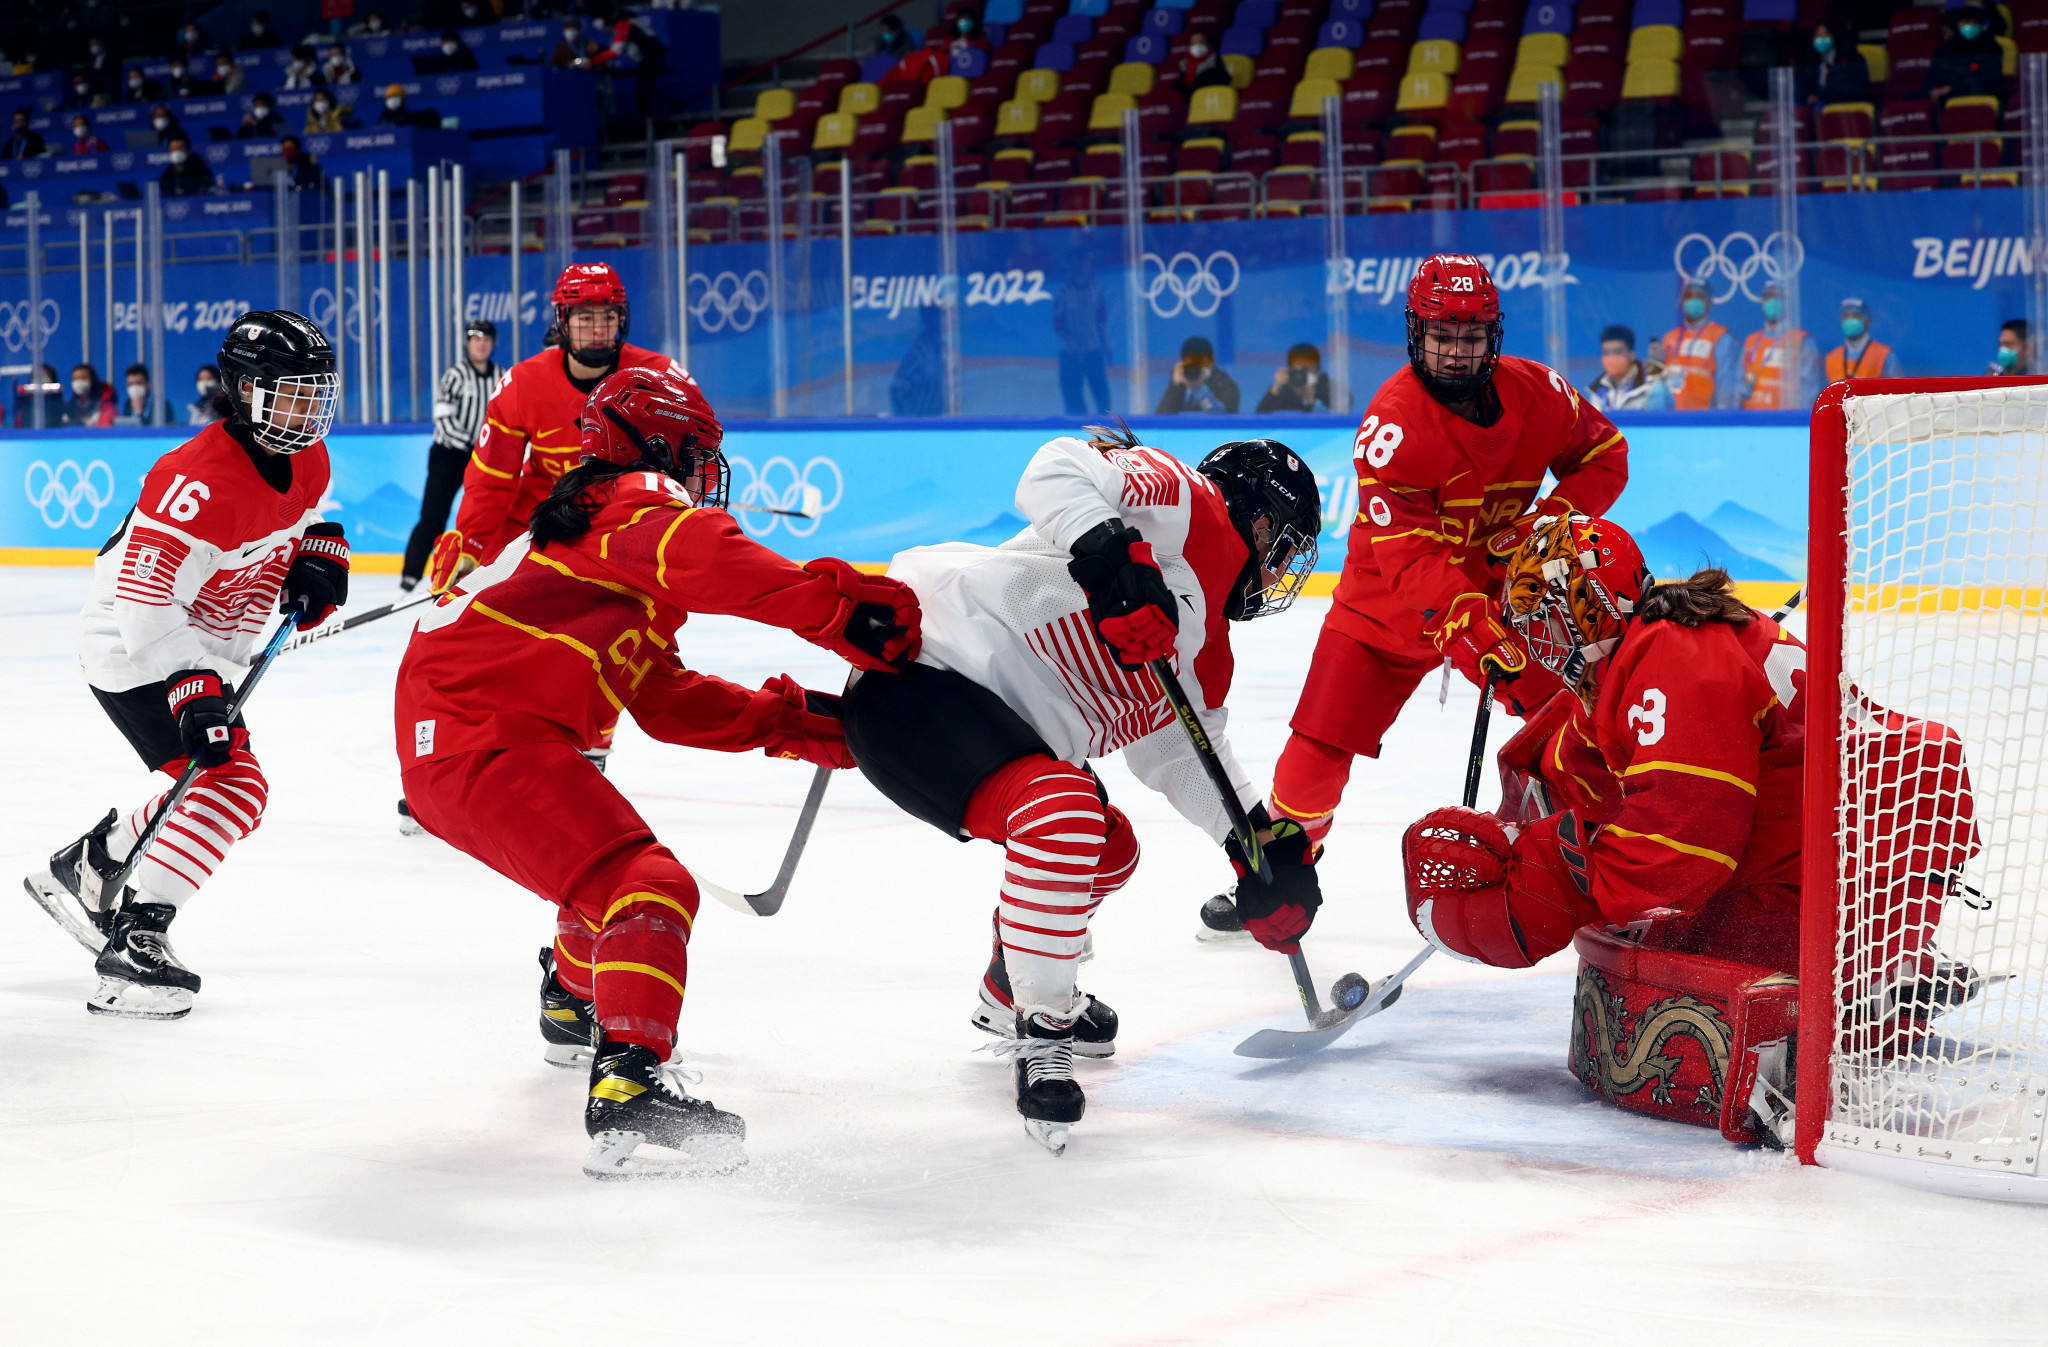 Chinese film star becomes ice hockey ambassador as Beijing 2022 push continues